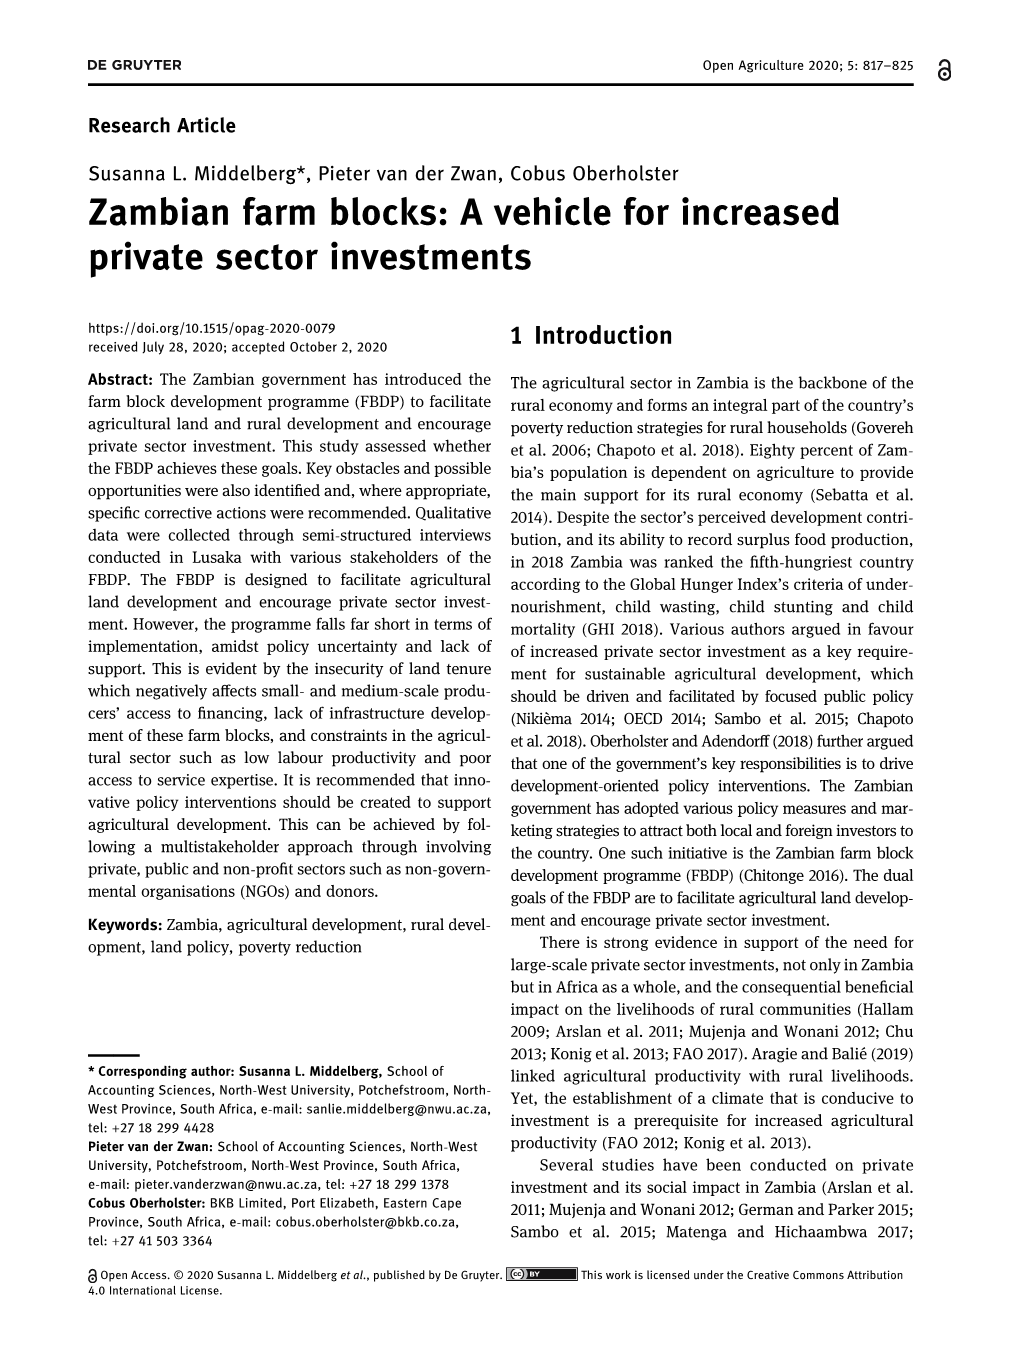 Zambian Farm Blocks: a Vehicle for Increased Private Sector Investments